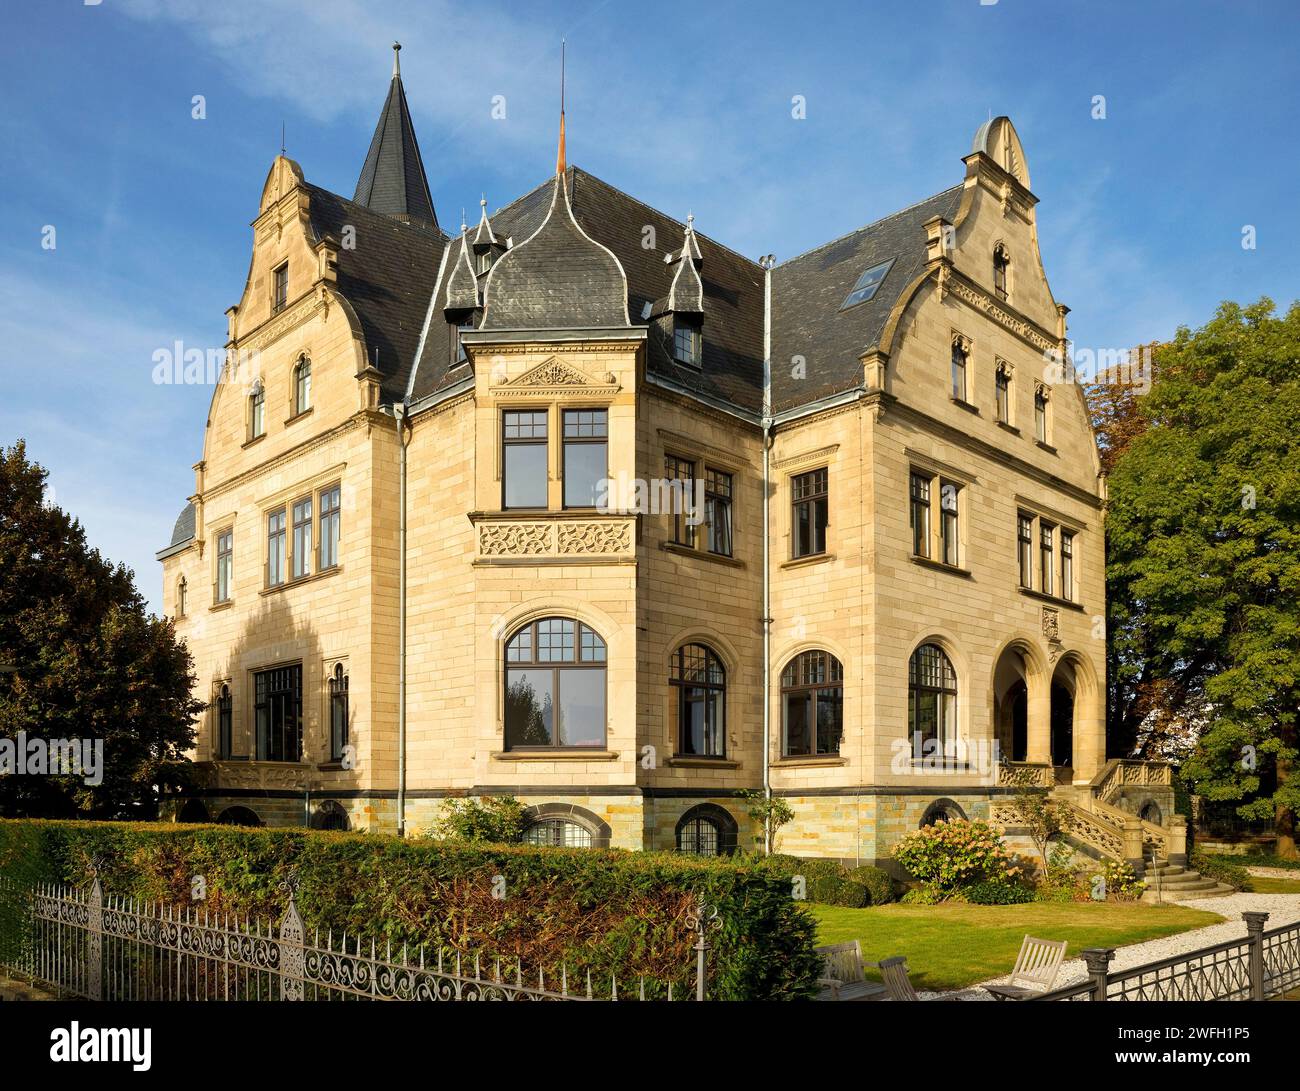 Villa Spiritus, was used by the armed forces of the United Kingdom from 1945 to 2011, Germany, North Rhine-Westphalia, Bonn Stock Photo